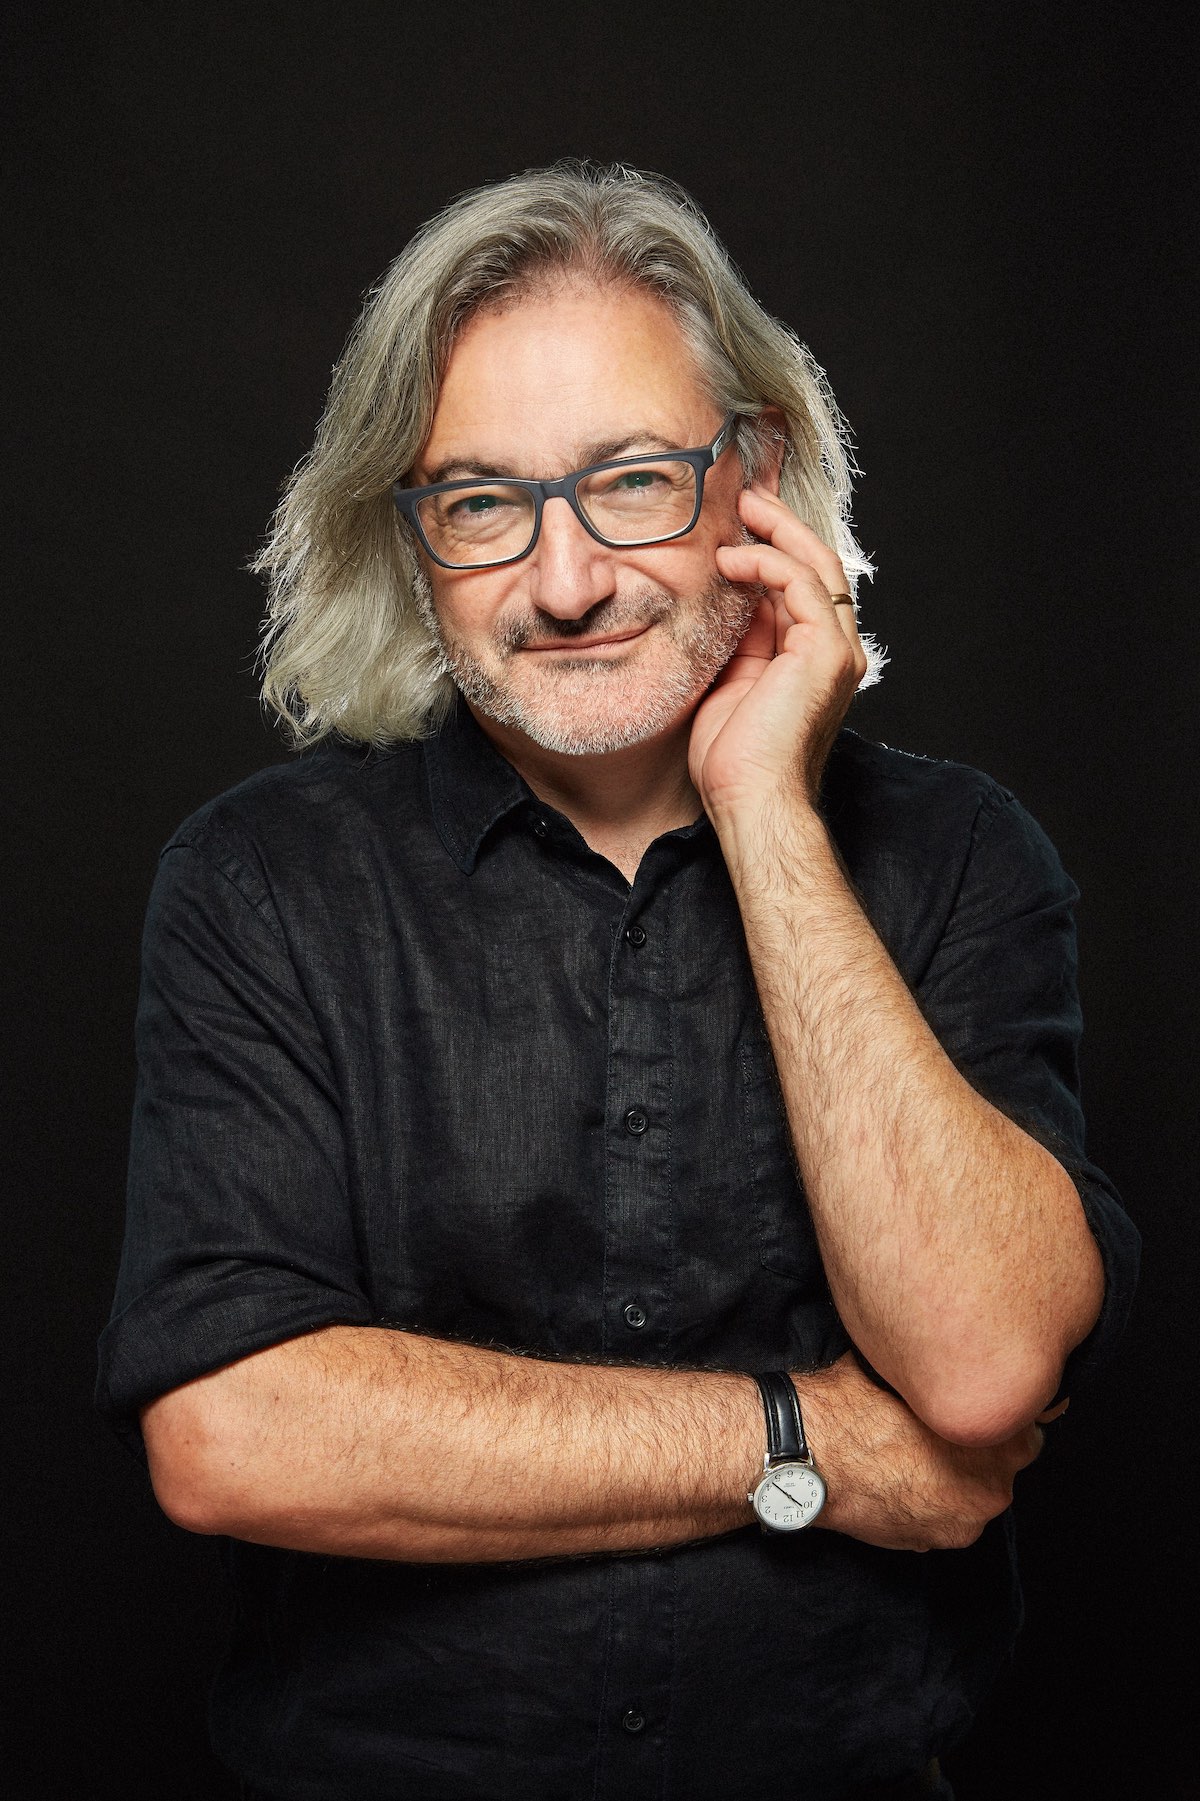 A photo of writer Gary Barwin. He is a light skin-toned man with chin-length grey hair and glasses, and he wears a black button down shirt against a black background.